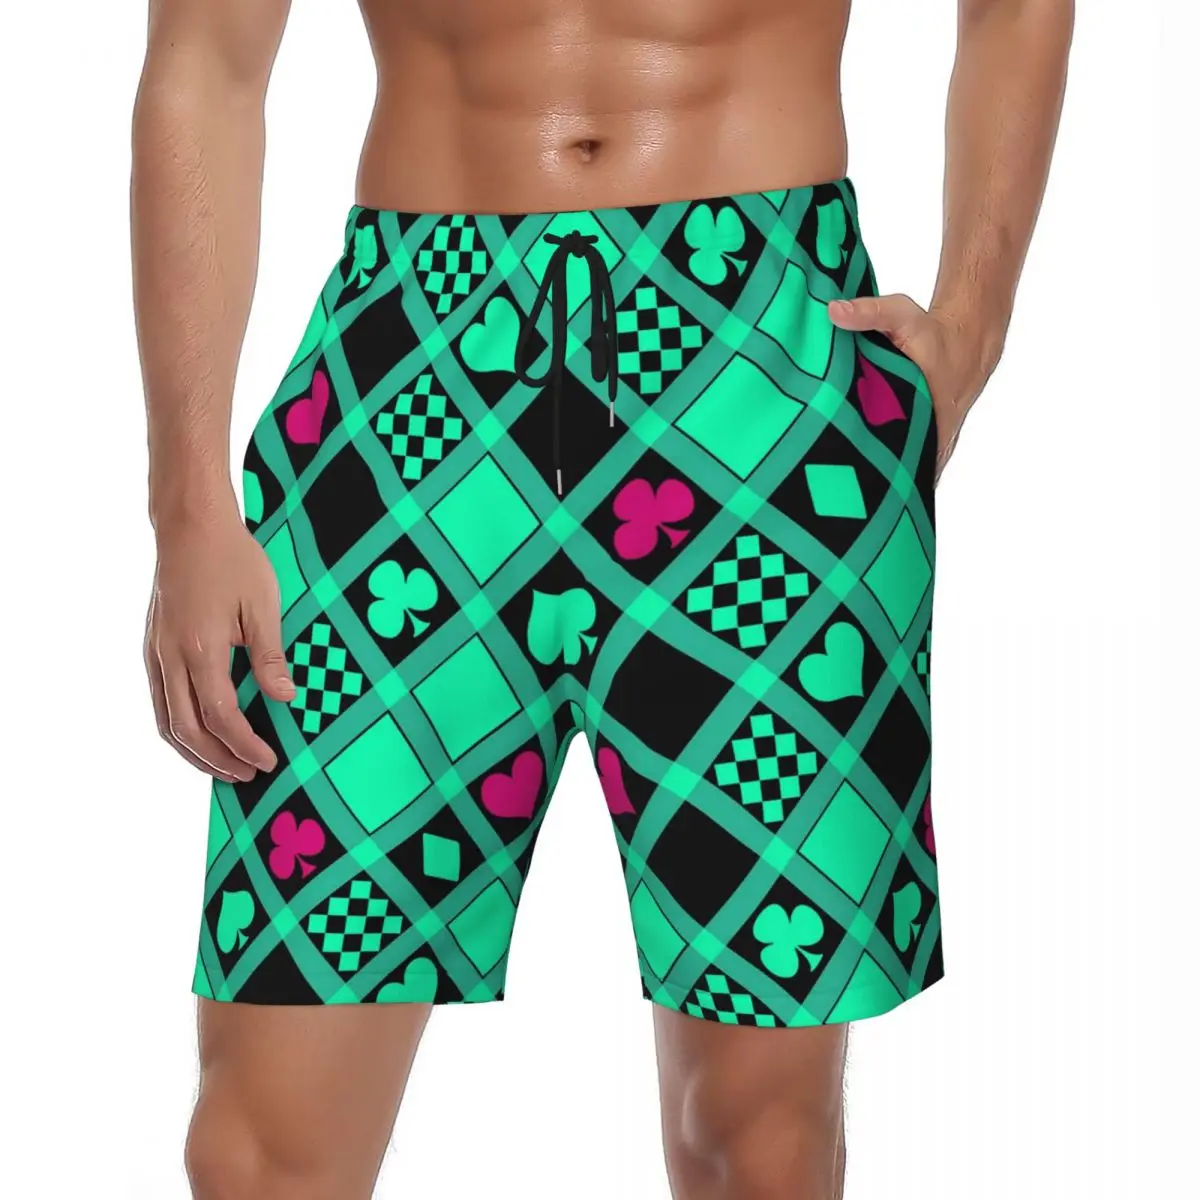 

Summer Board Shorts Males Casino Poker Cards Surfing Playing Card Design Beach Short Pants Casual Fast Dry Swim Trunks Plus Size